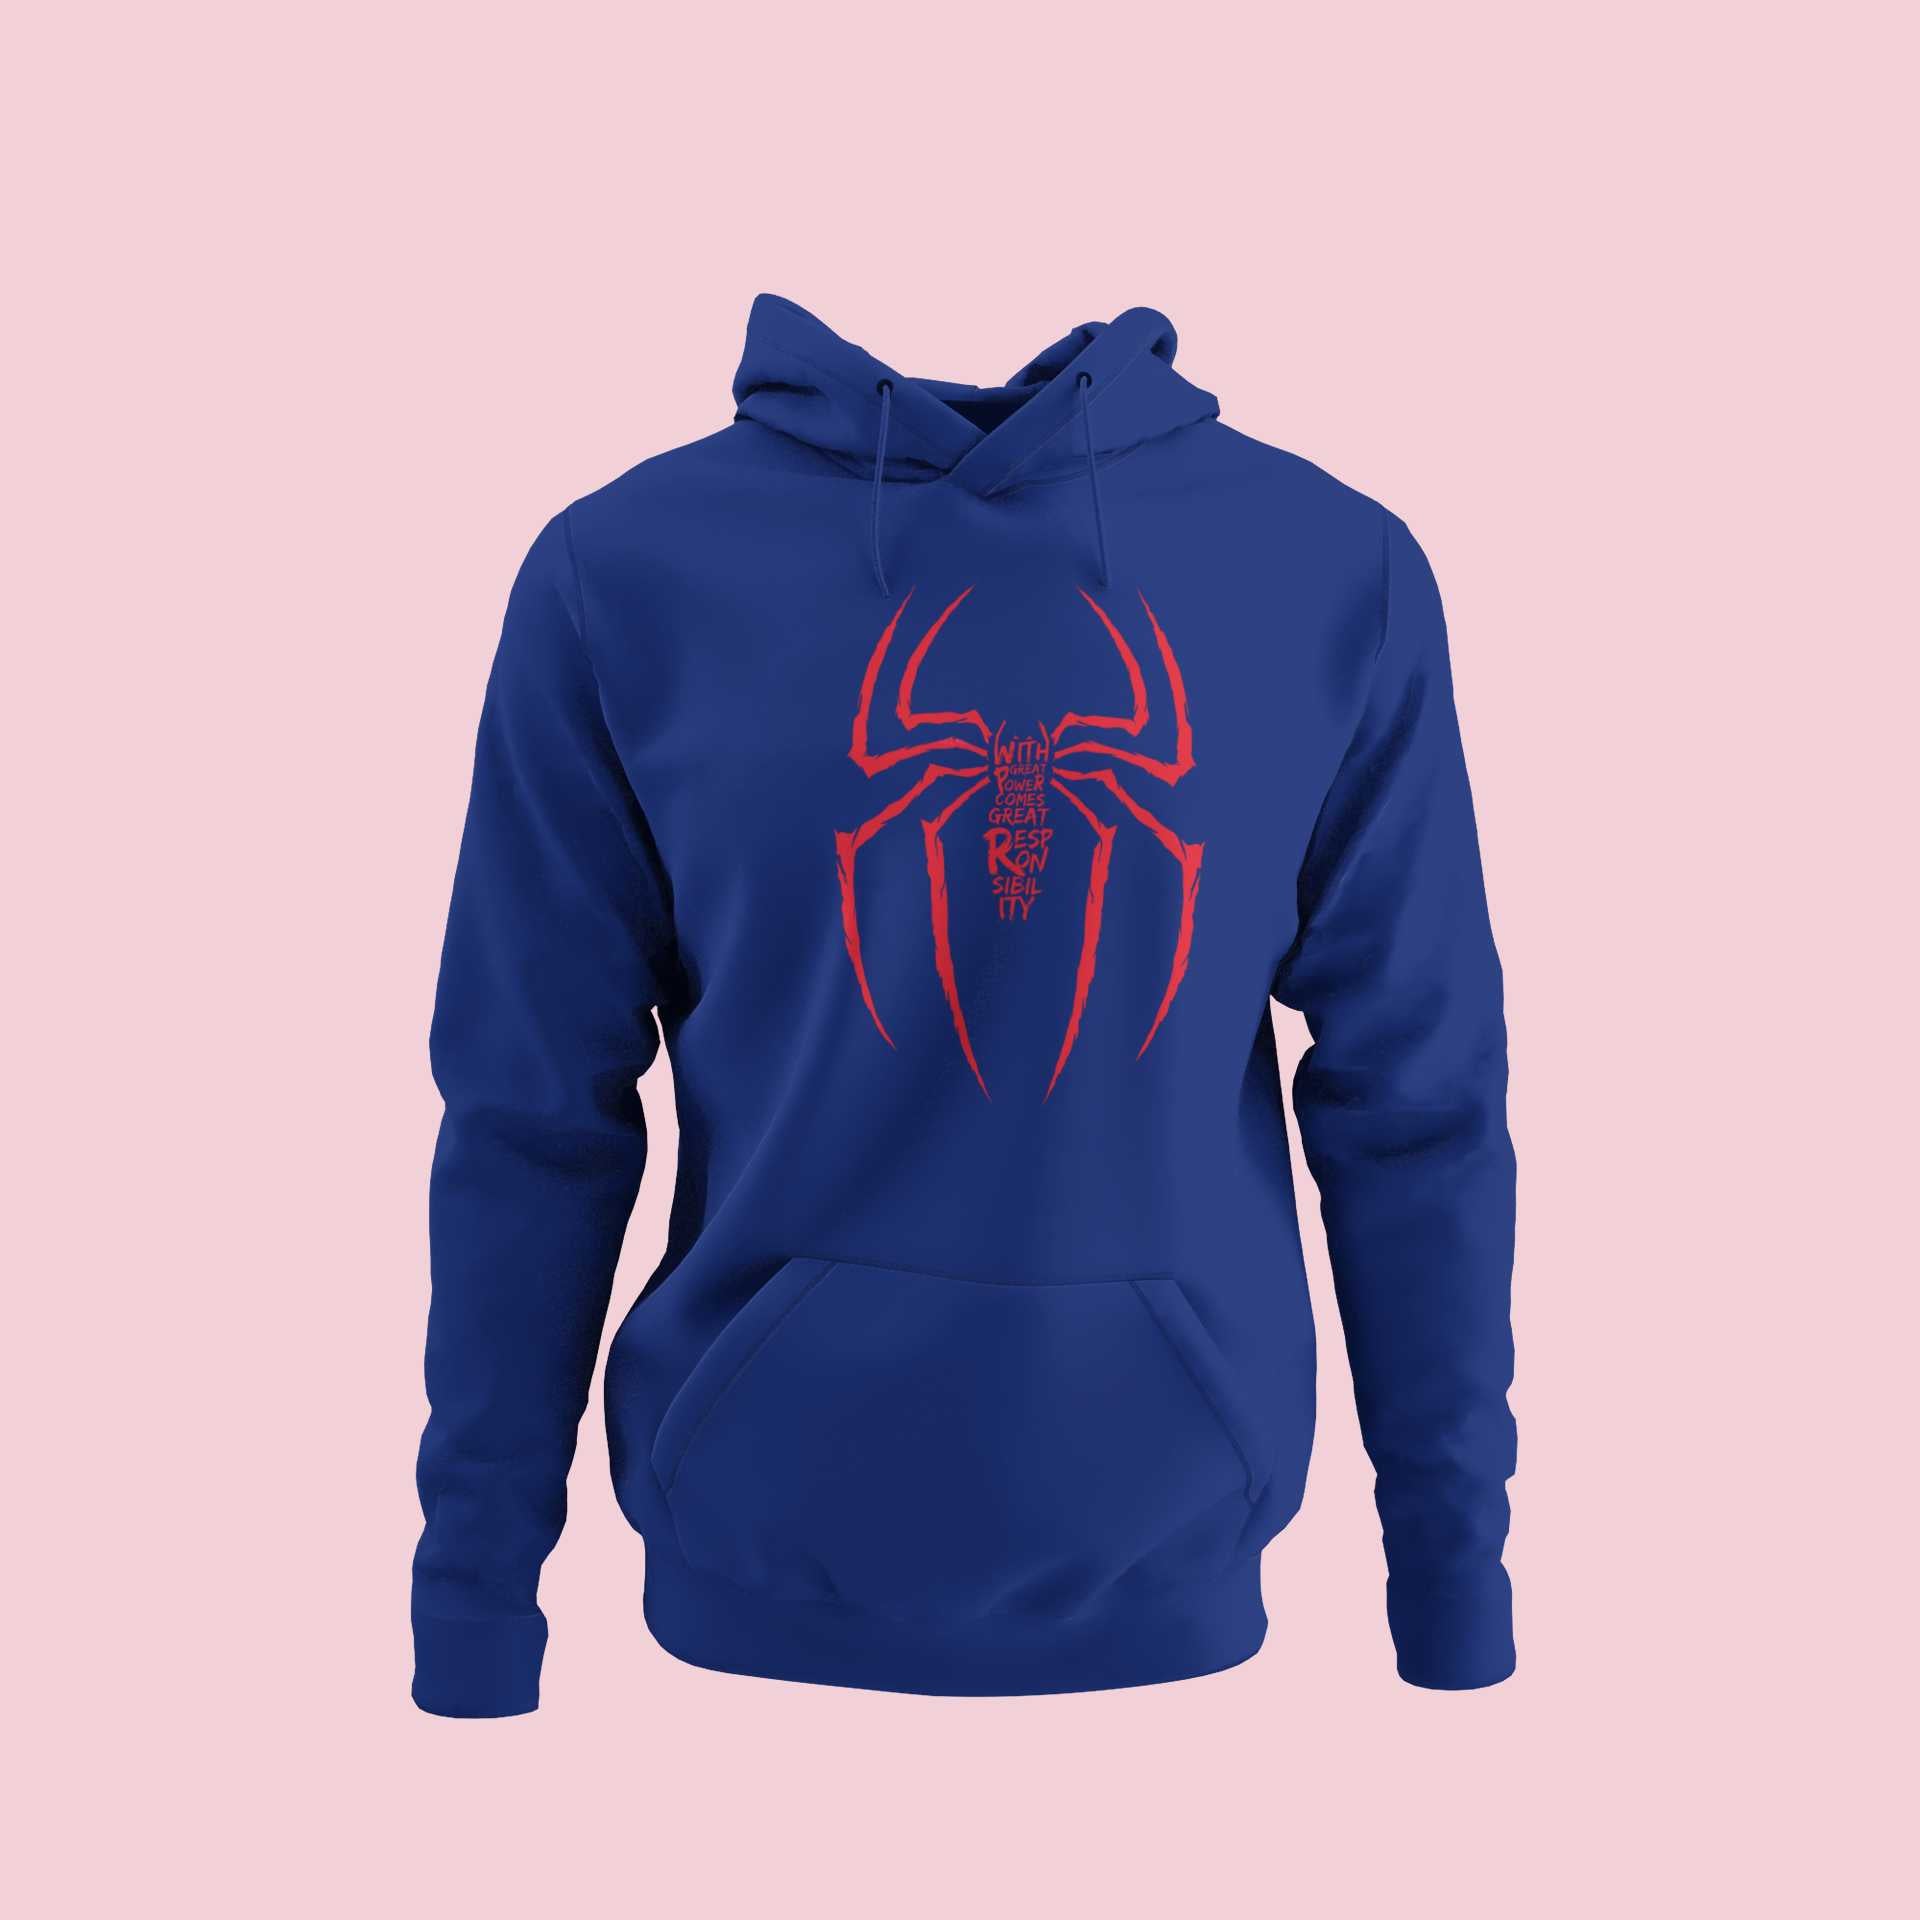 With Great Power Comes Great Responsibility - Unisex Hoodie Strong Soul Hoodie